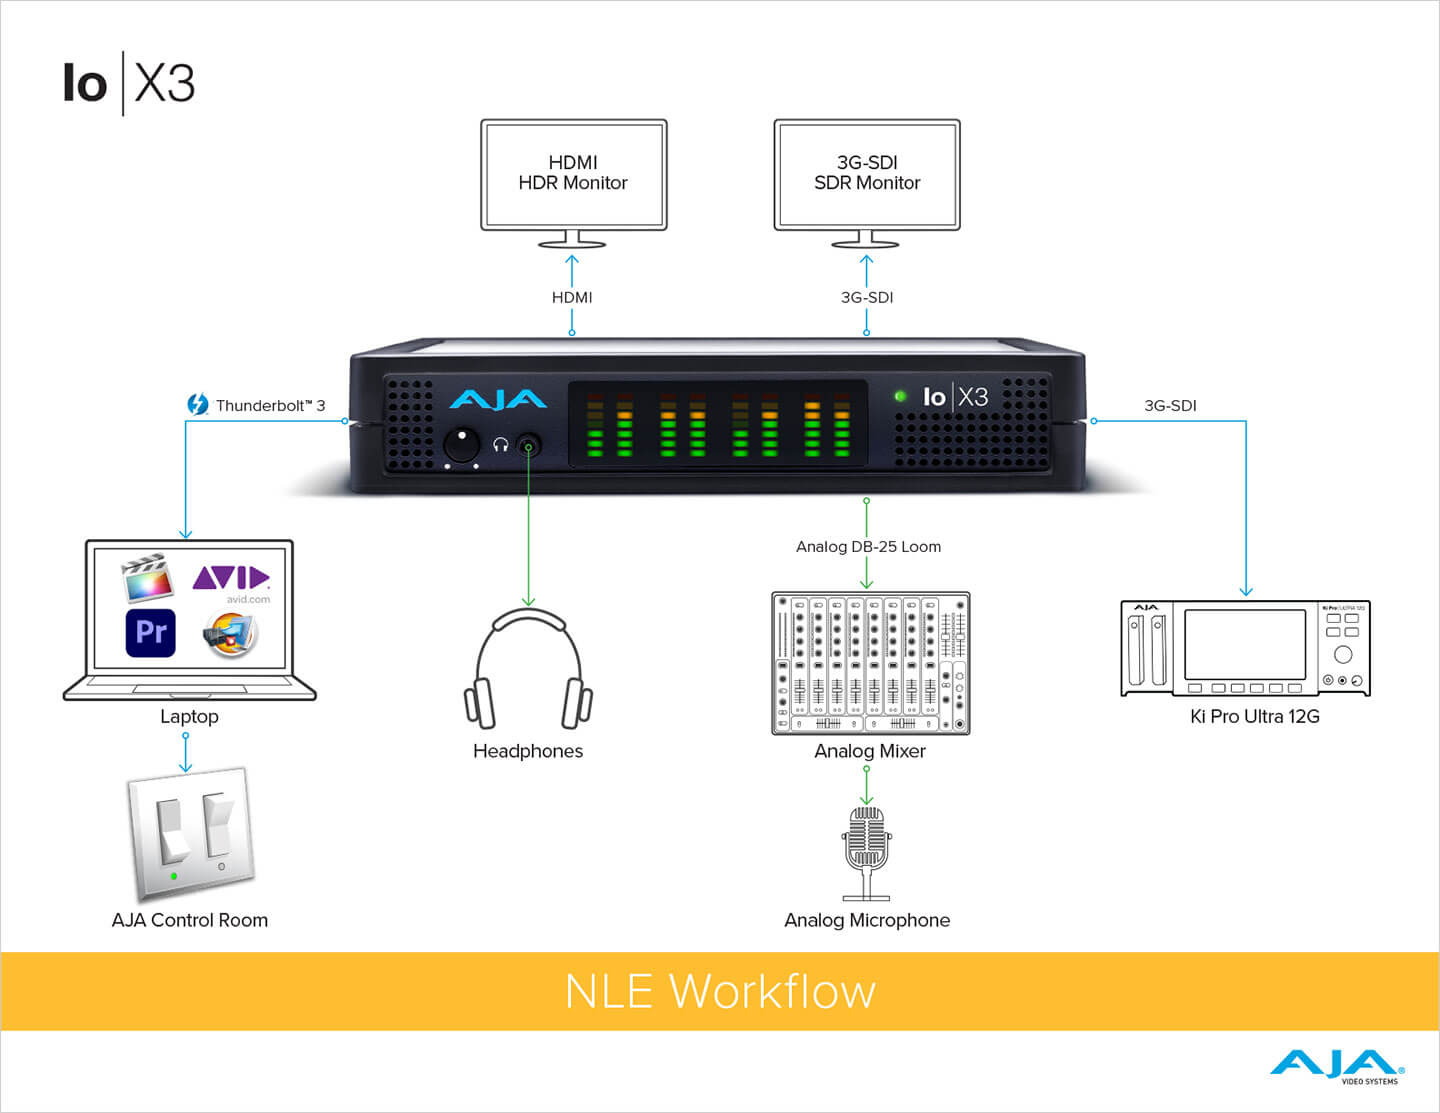 NLE Workflow